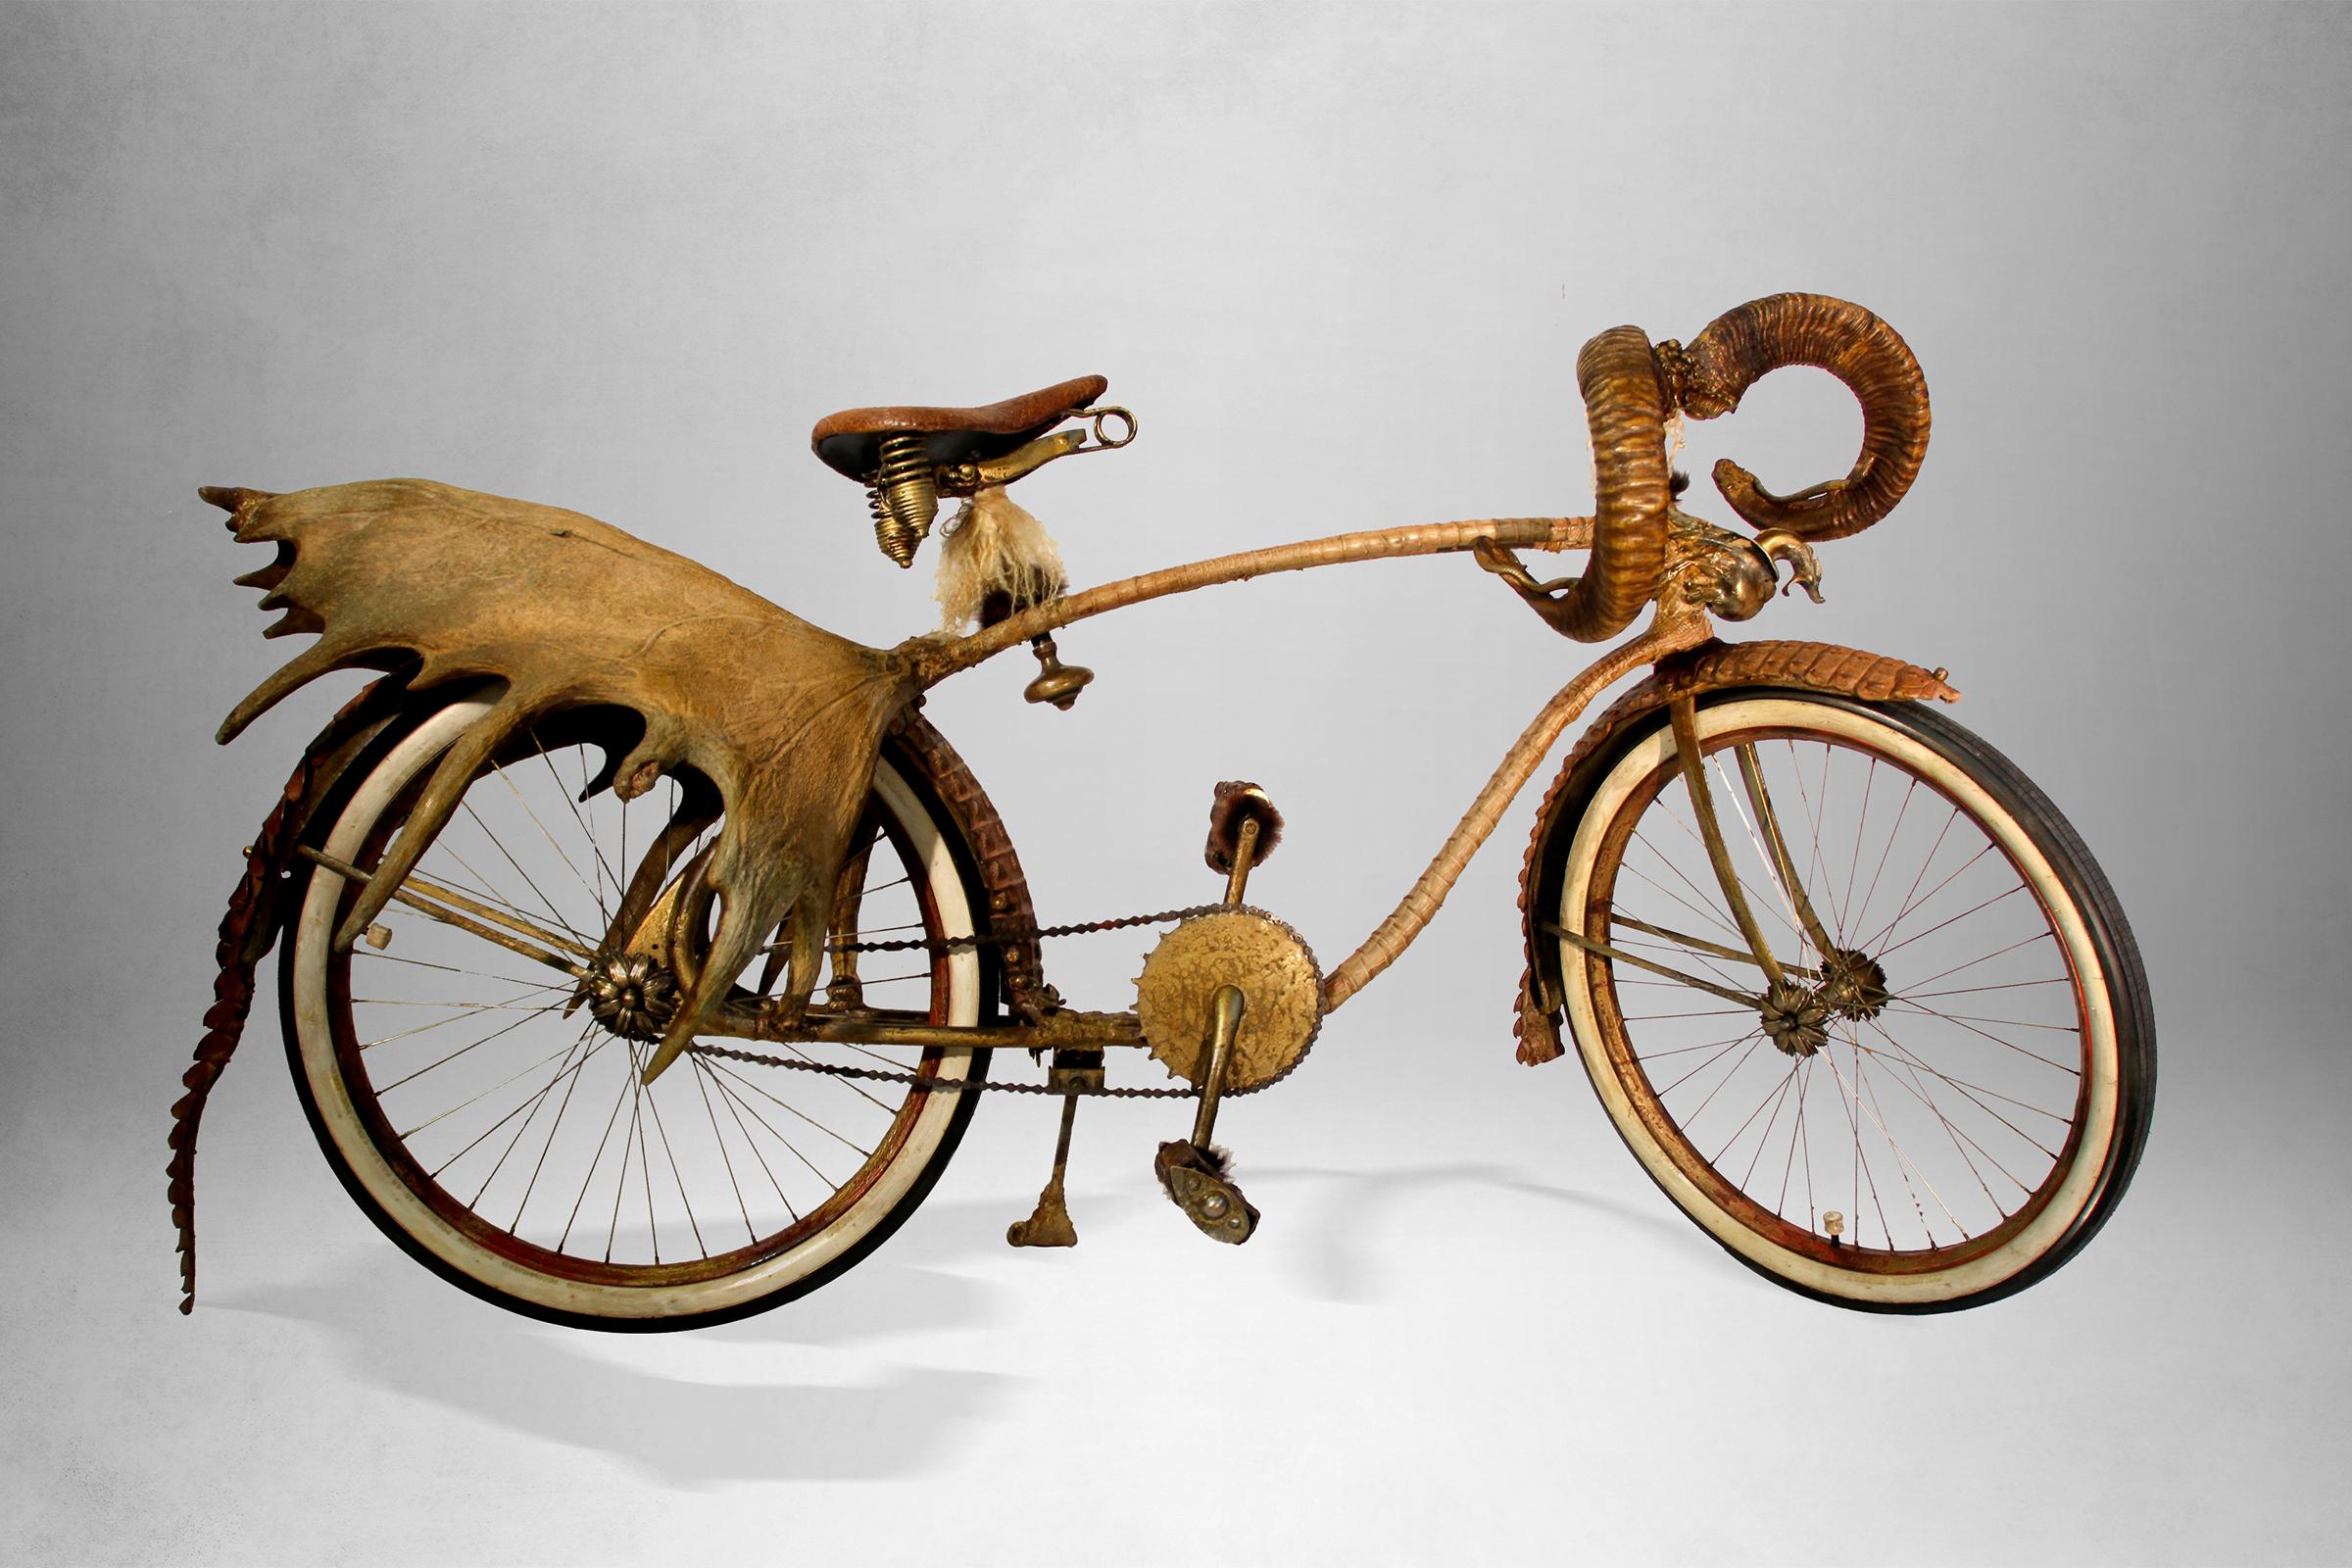 Bike Safari original twin 1920 Elgin model
with all structure covered with crocodile skin.
With Reindeer horns and Aries horns. Details
and finishes in bronze. Exceptional and unique
piece made in France in 2019.